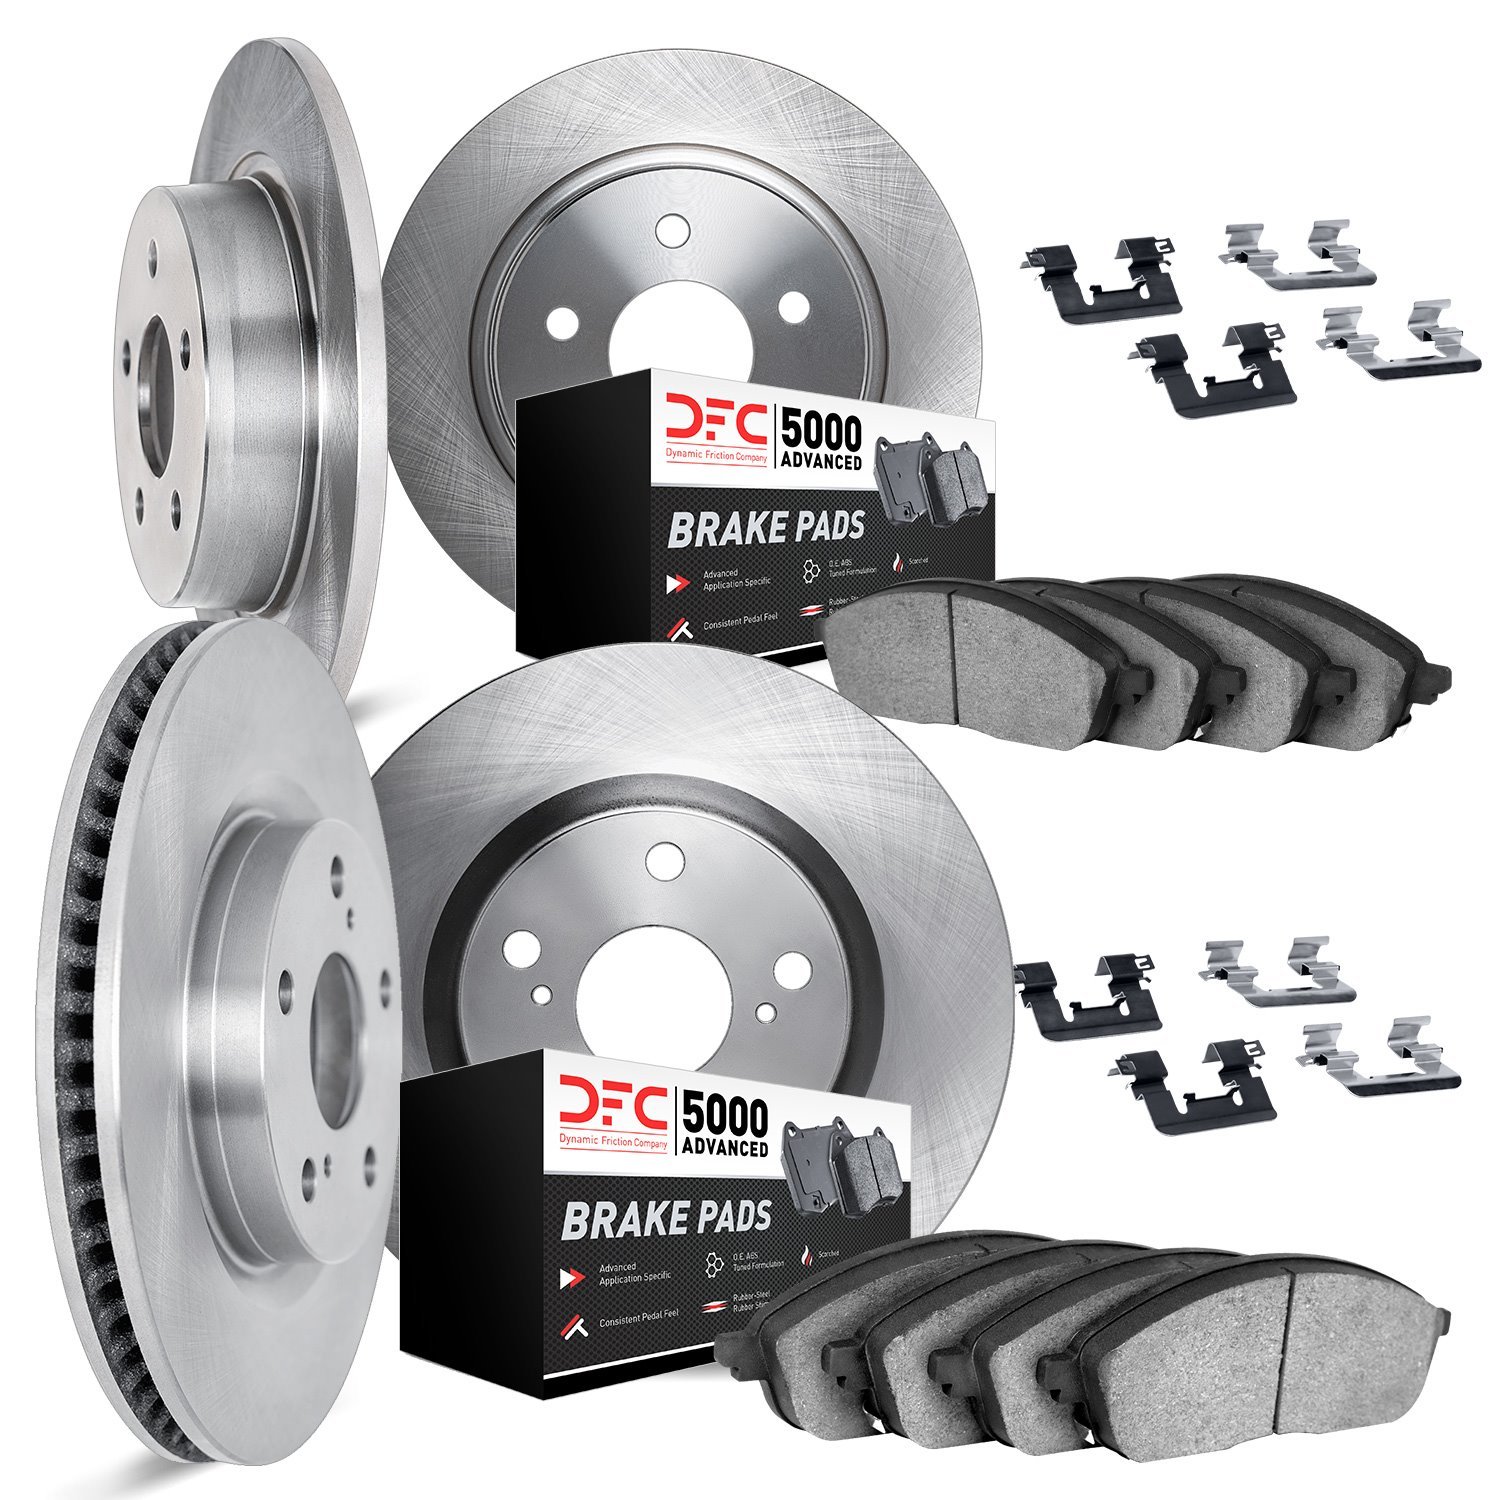 6514-20027 Brake Rotors w/5000 Advanced Brake Pads Kit with Hardware, 2017-2019 Jaguar, Position: Front and Rear